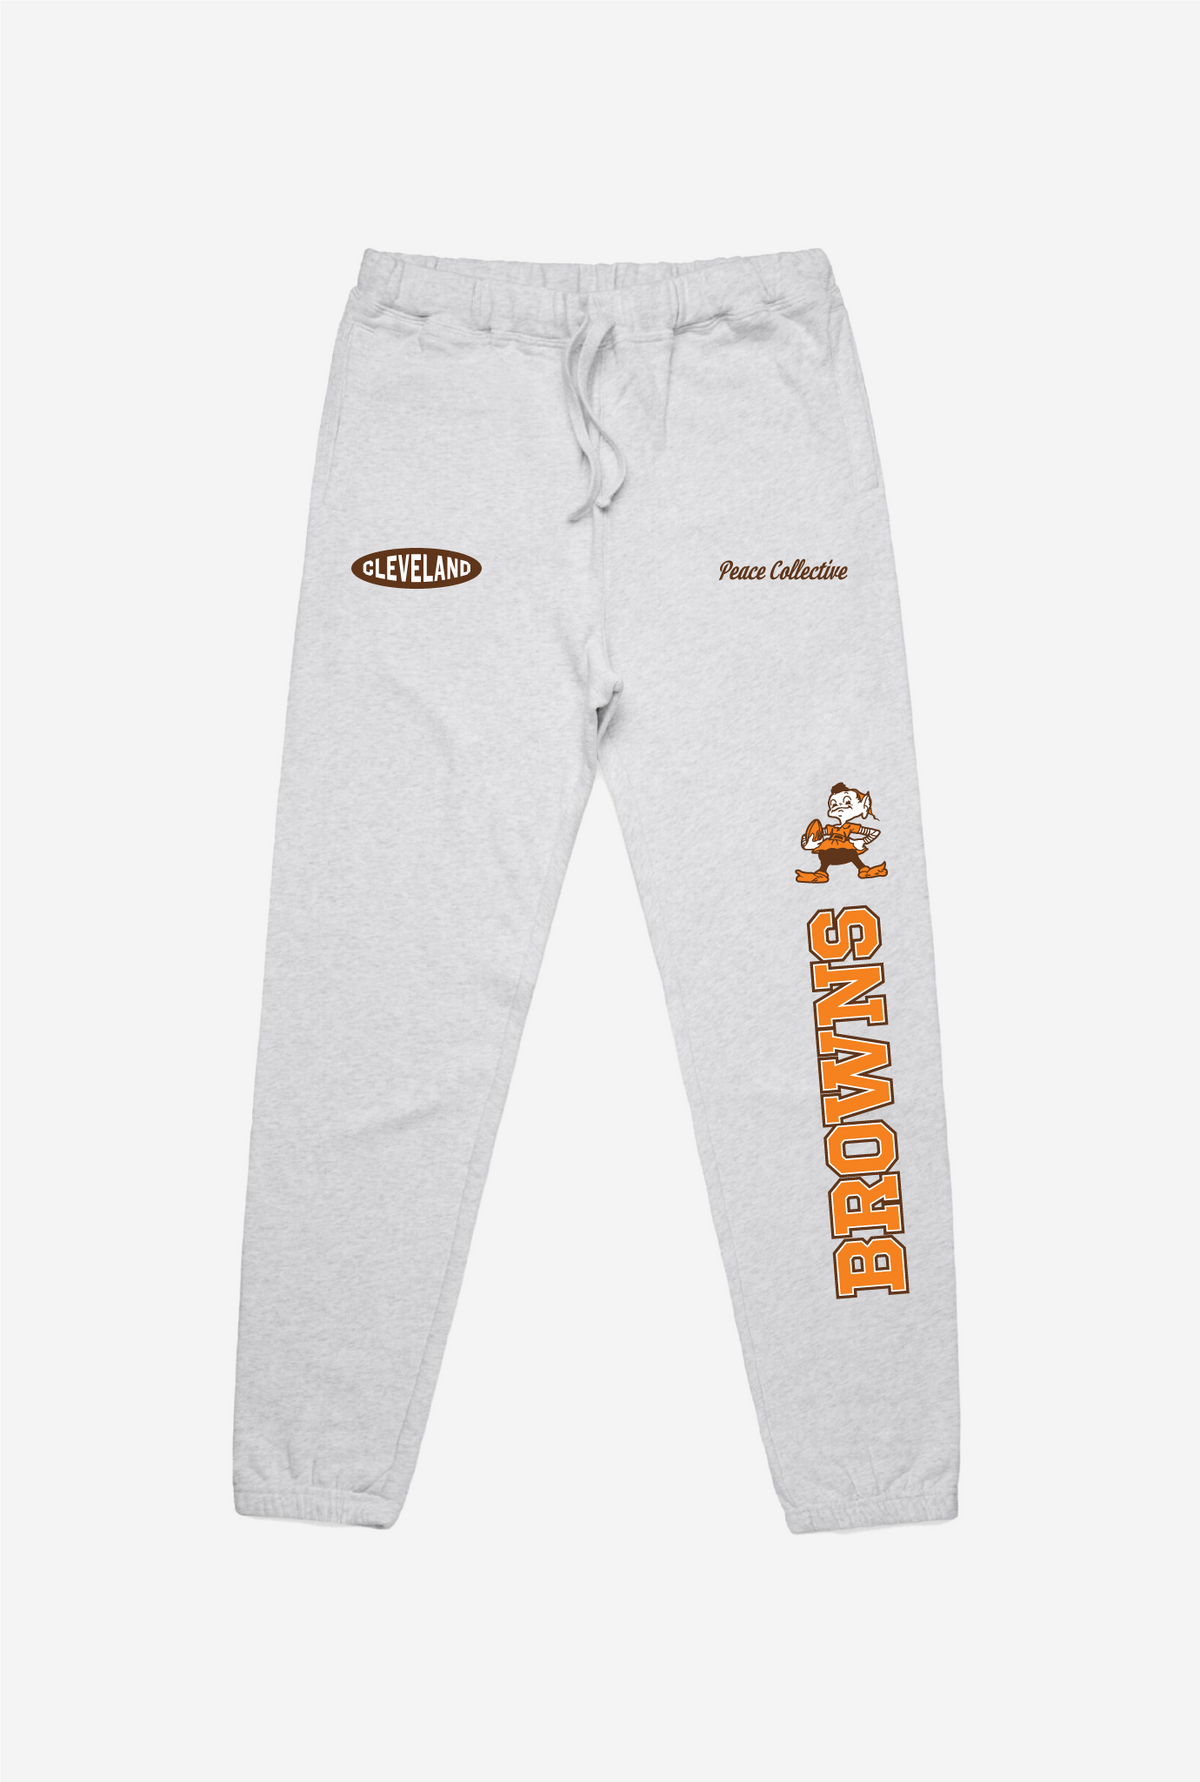 Cleveland Browns Washed Graphic Joggers - Ash